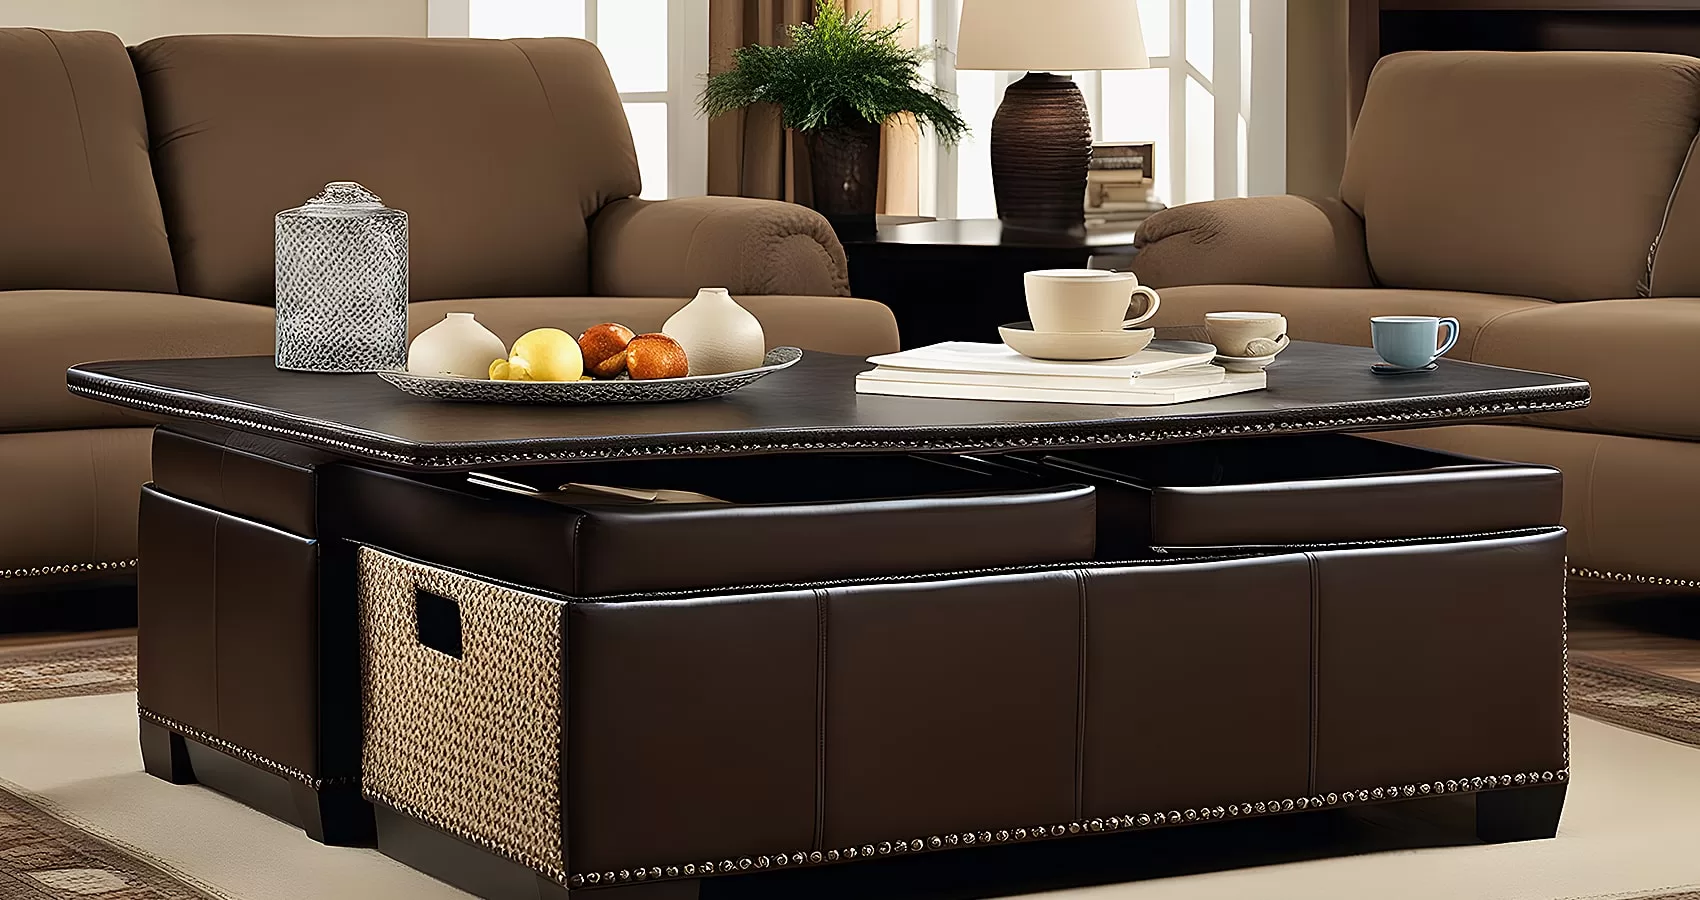 Ottoman coffee table with storage